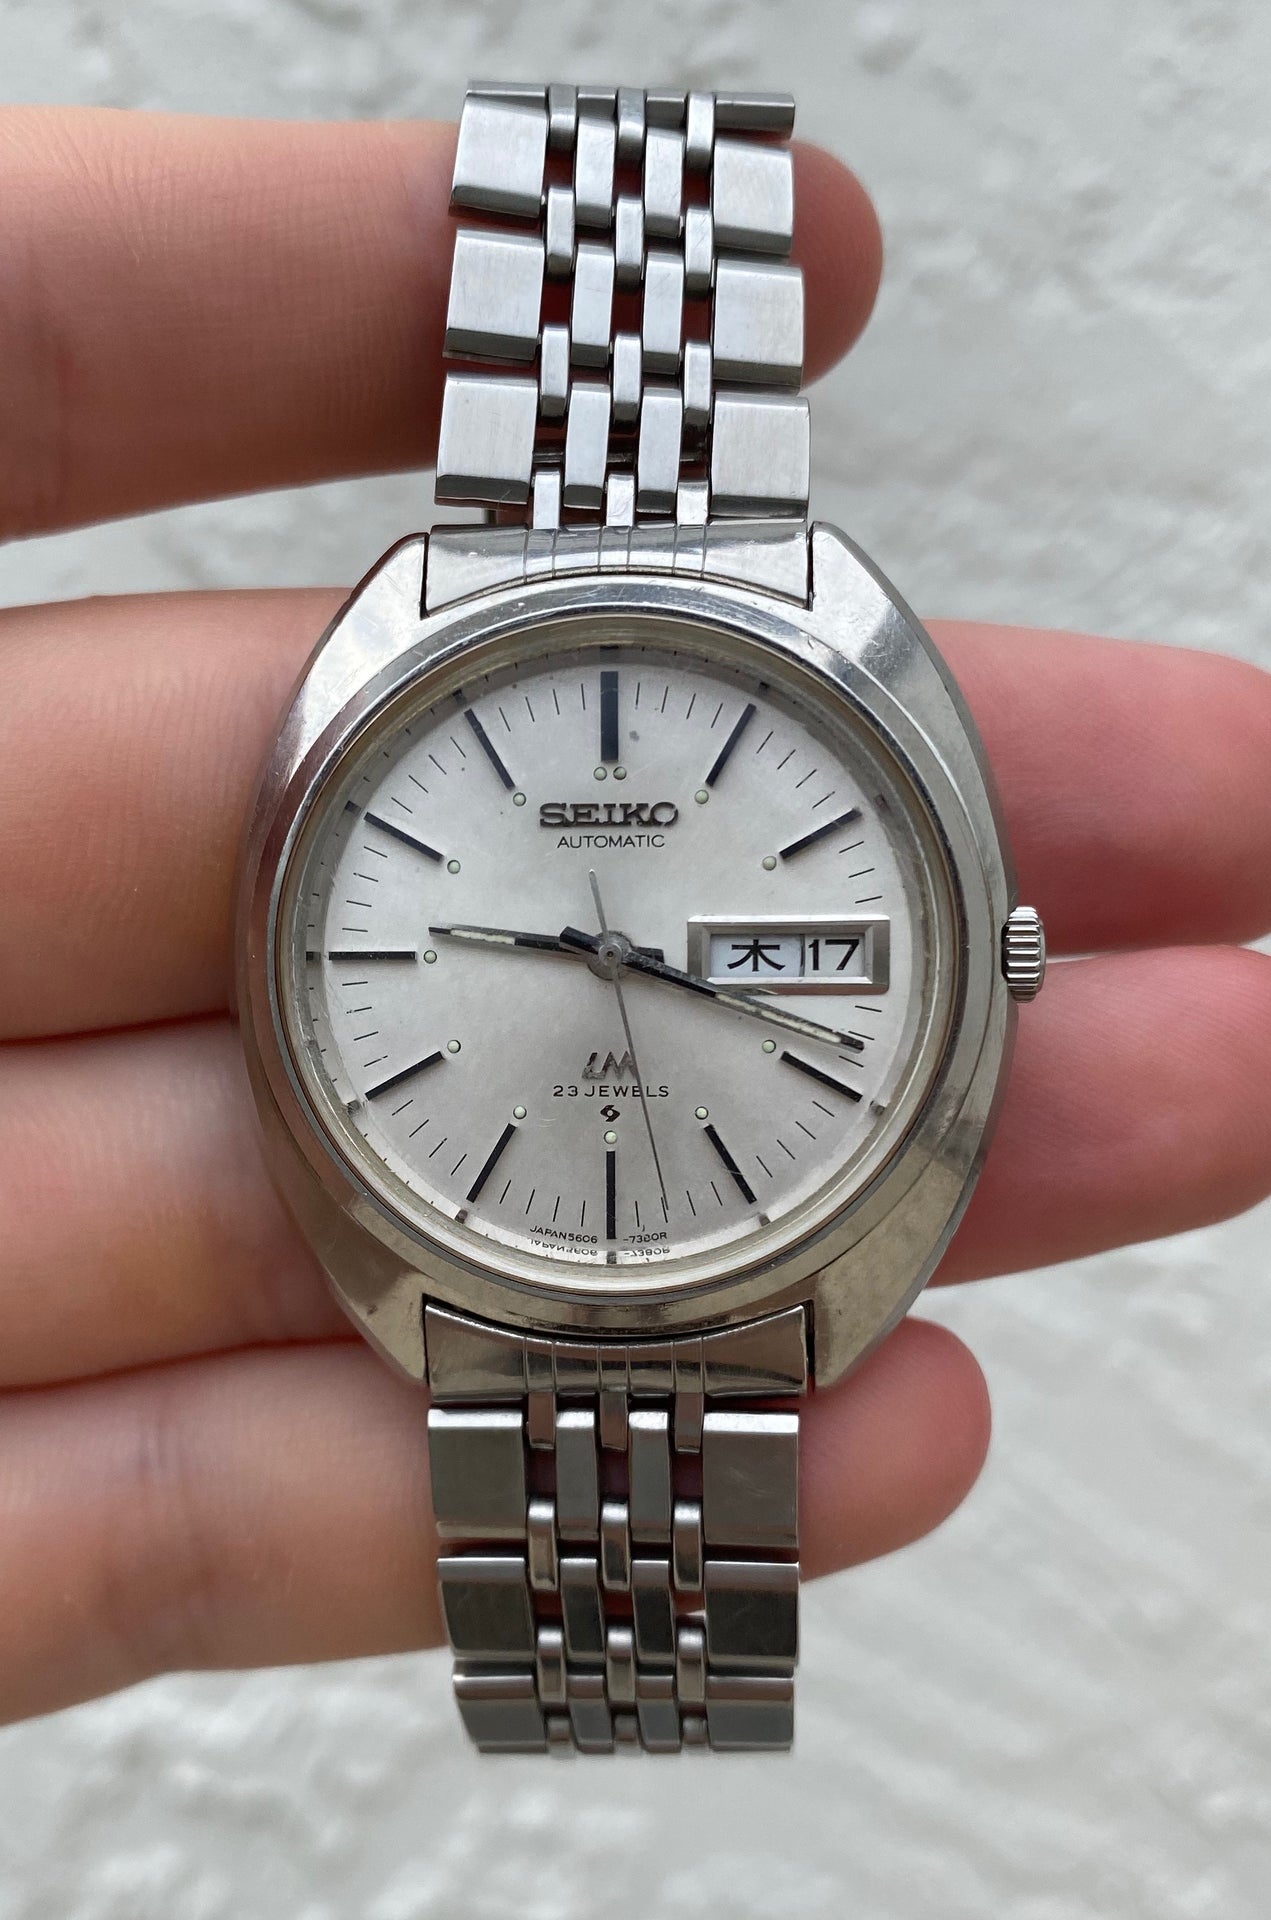 SOLD] FS: Vintage Seiko Lordmatic Lord Matic LM 5606-7150 [SERVICED] |  WatchUSeek Watch Forums